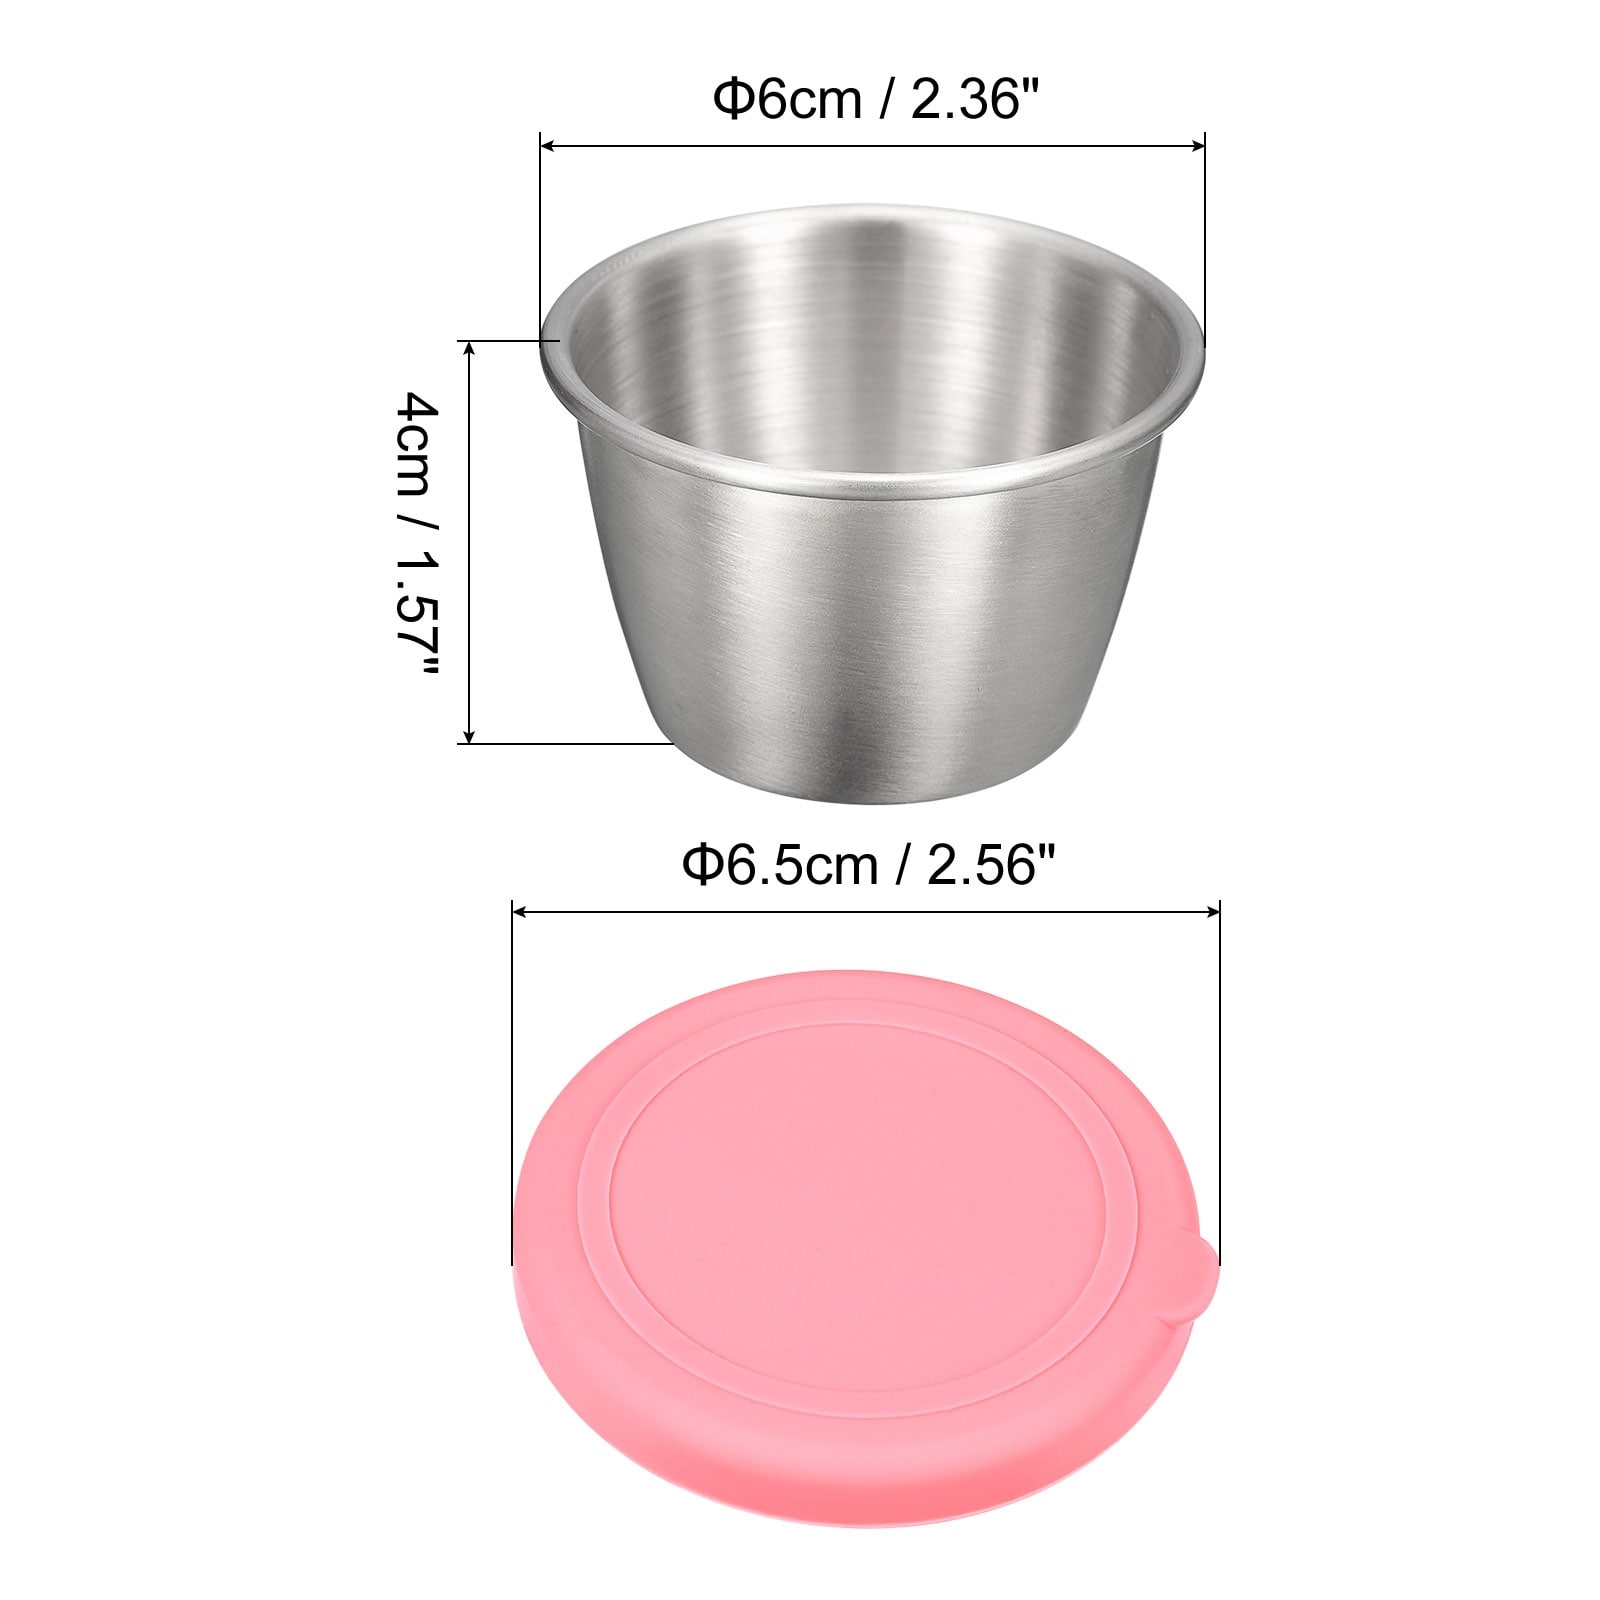 https://ak1.ostkcdn.com/images/products/is/images/direct/9c365ccda6b3e6c62aaa4aef1959f14cd2f623b9/4pcs-Small-Stainless-Steel-Condiment-Containers-Cups-for-Bento-Box.jpg